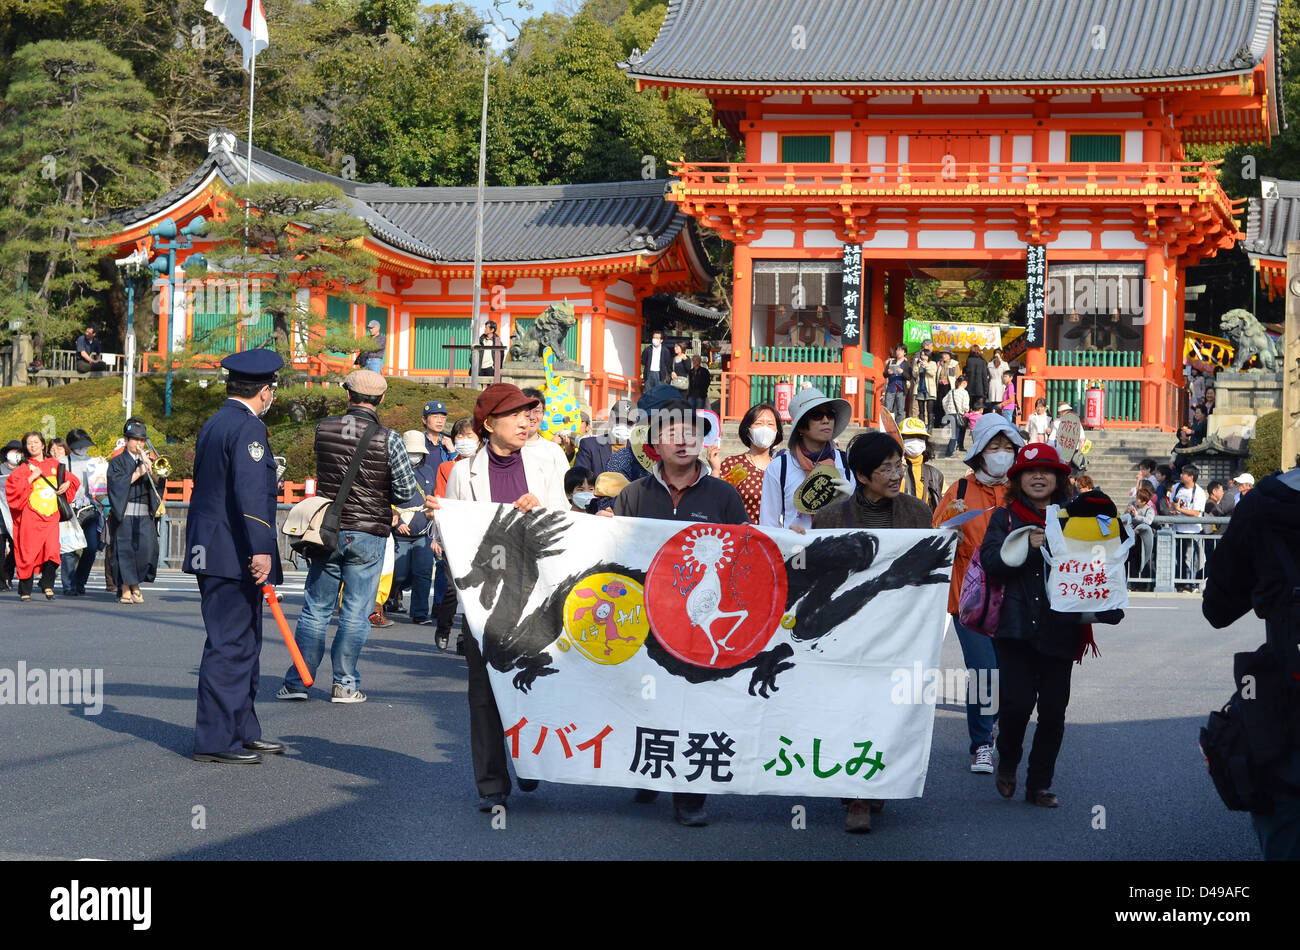 Kyoto, Japan. 9th March 2013. Protesters march through Kyoto against the restart of the country's nuclear power stations. The protest comes two days before the second anniversary of the Fukushima nuclear disaster. Credit:  Trevor Mogg / Alamy Live News Stock Photo